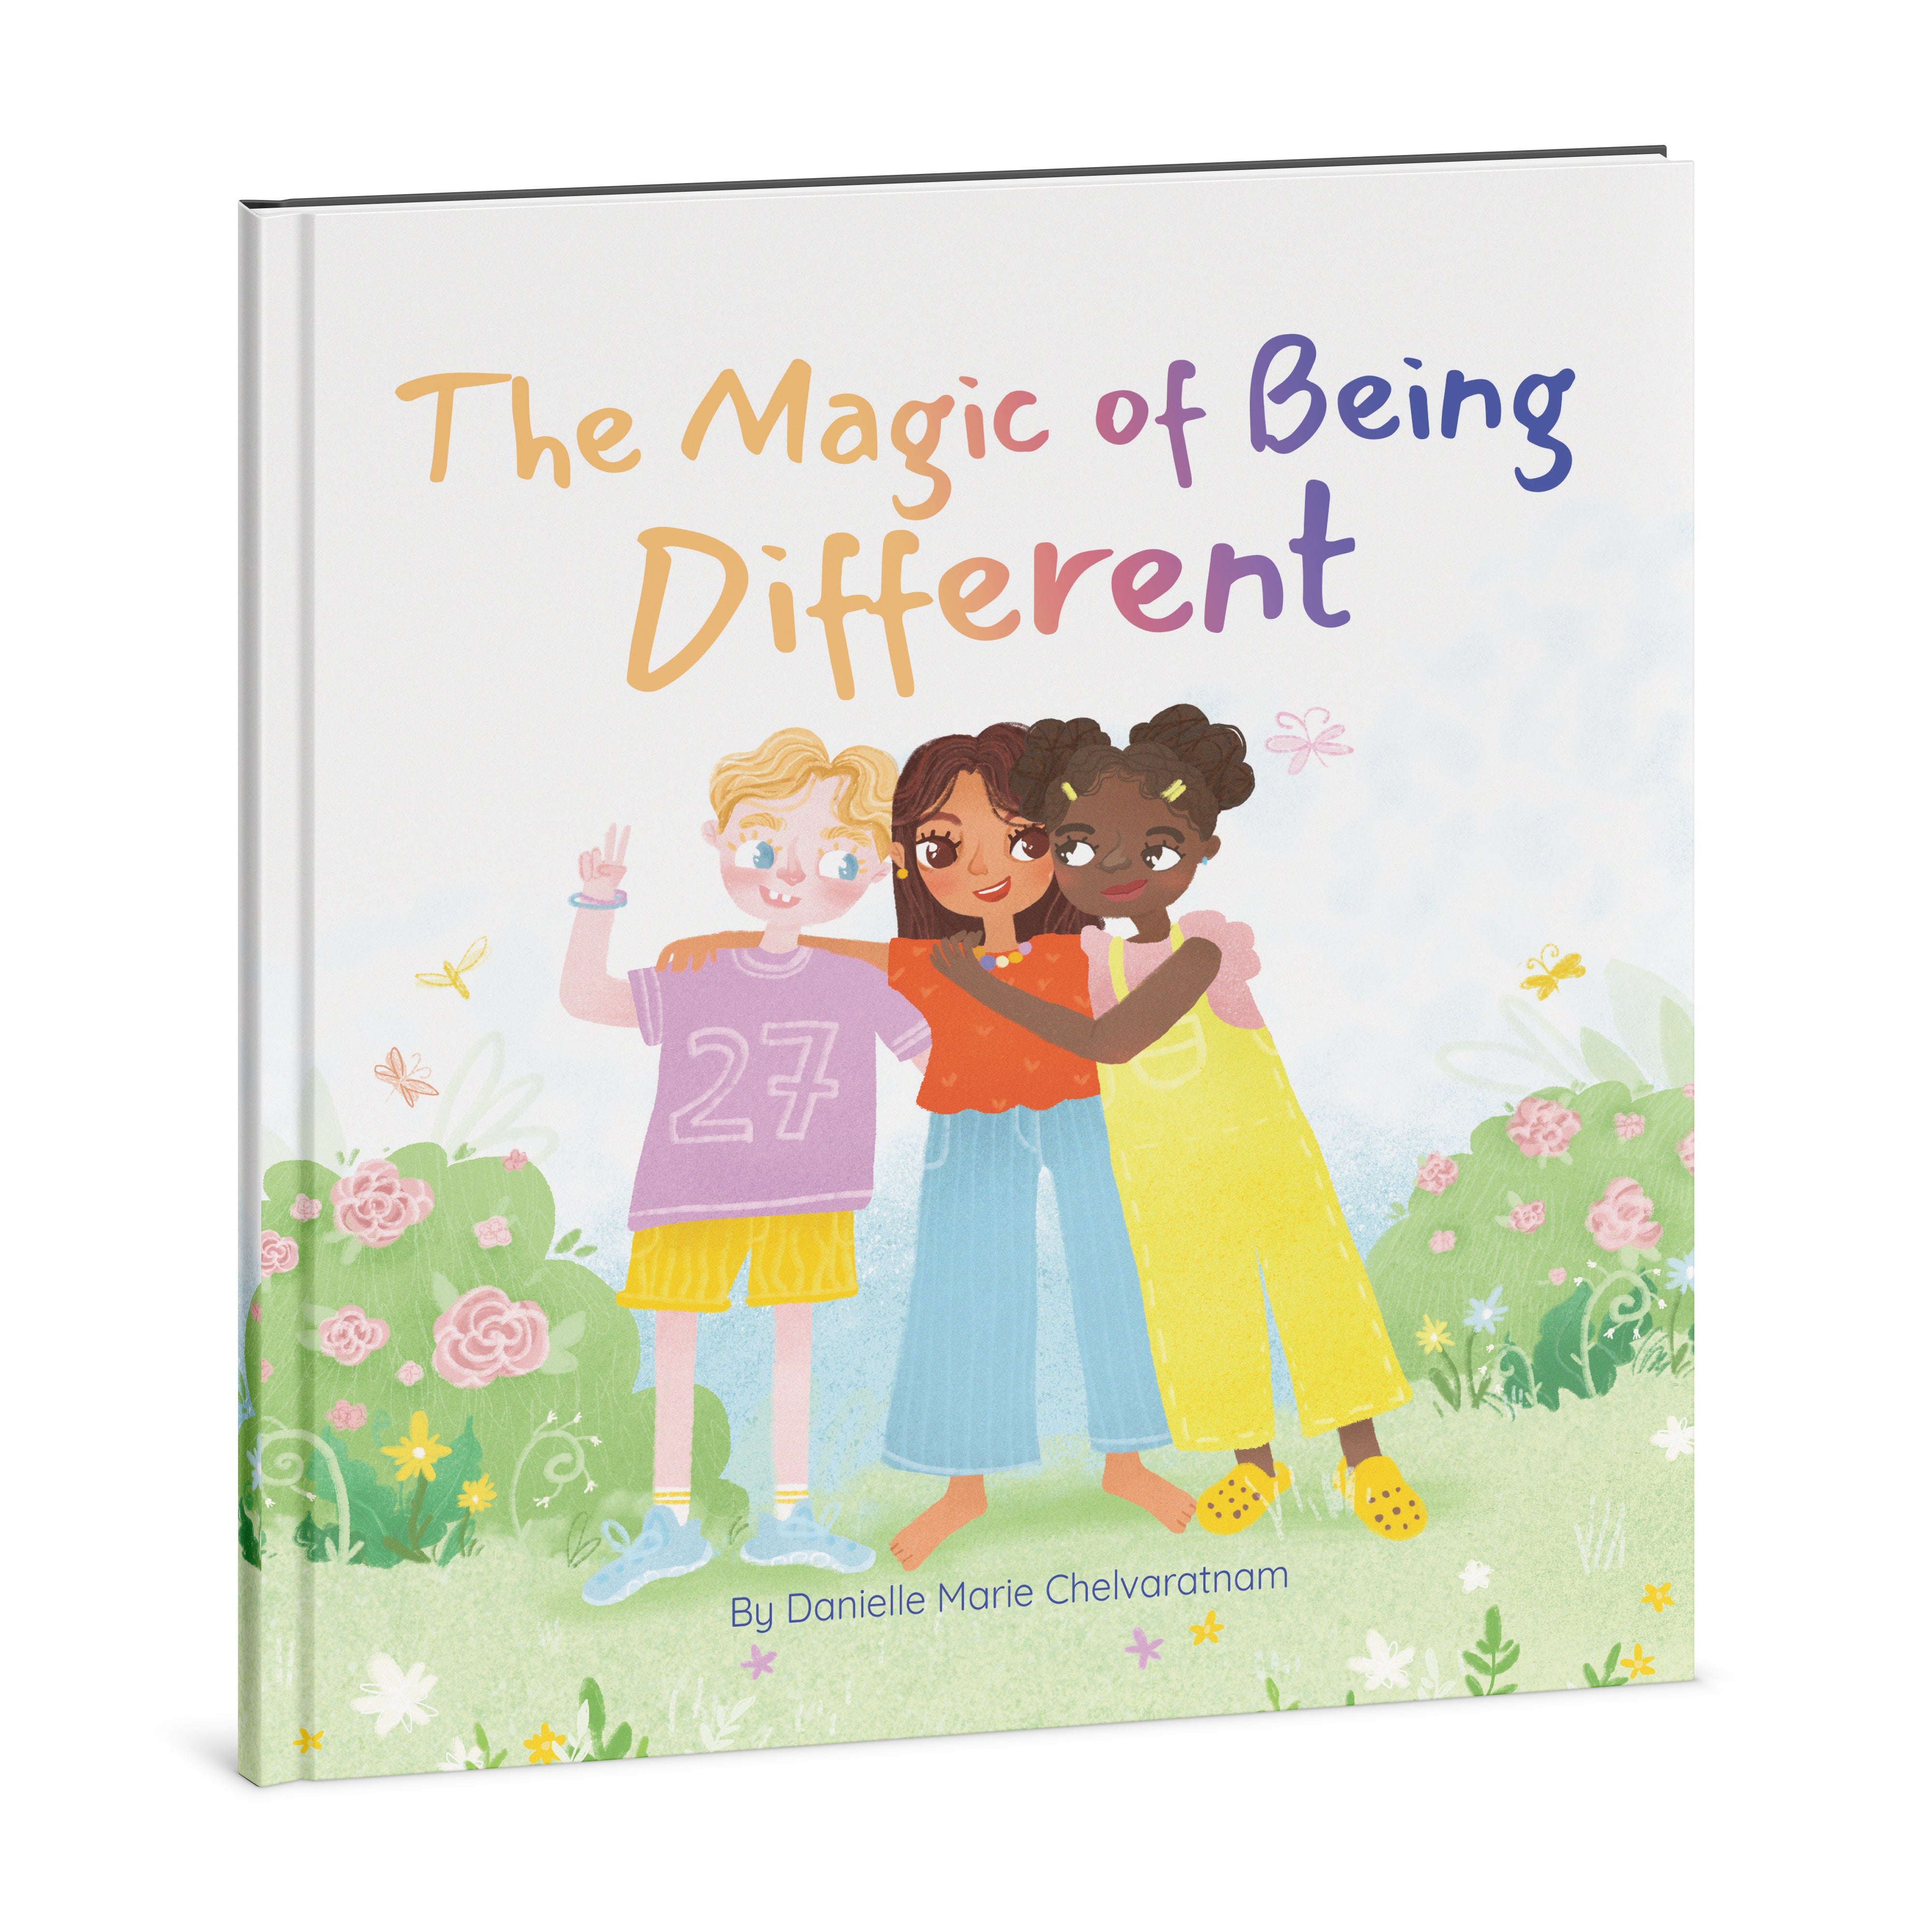 The Magic of Being Different